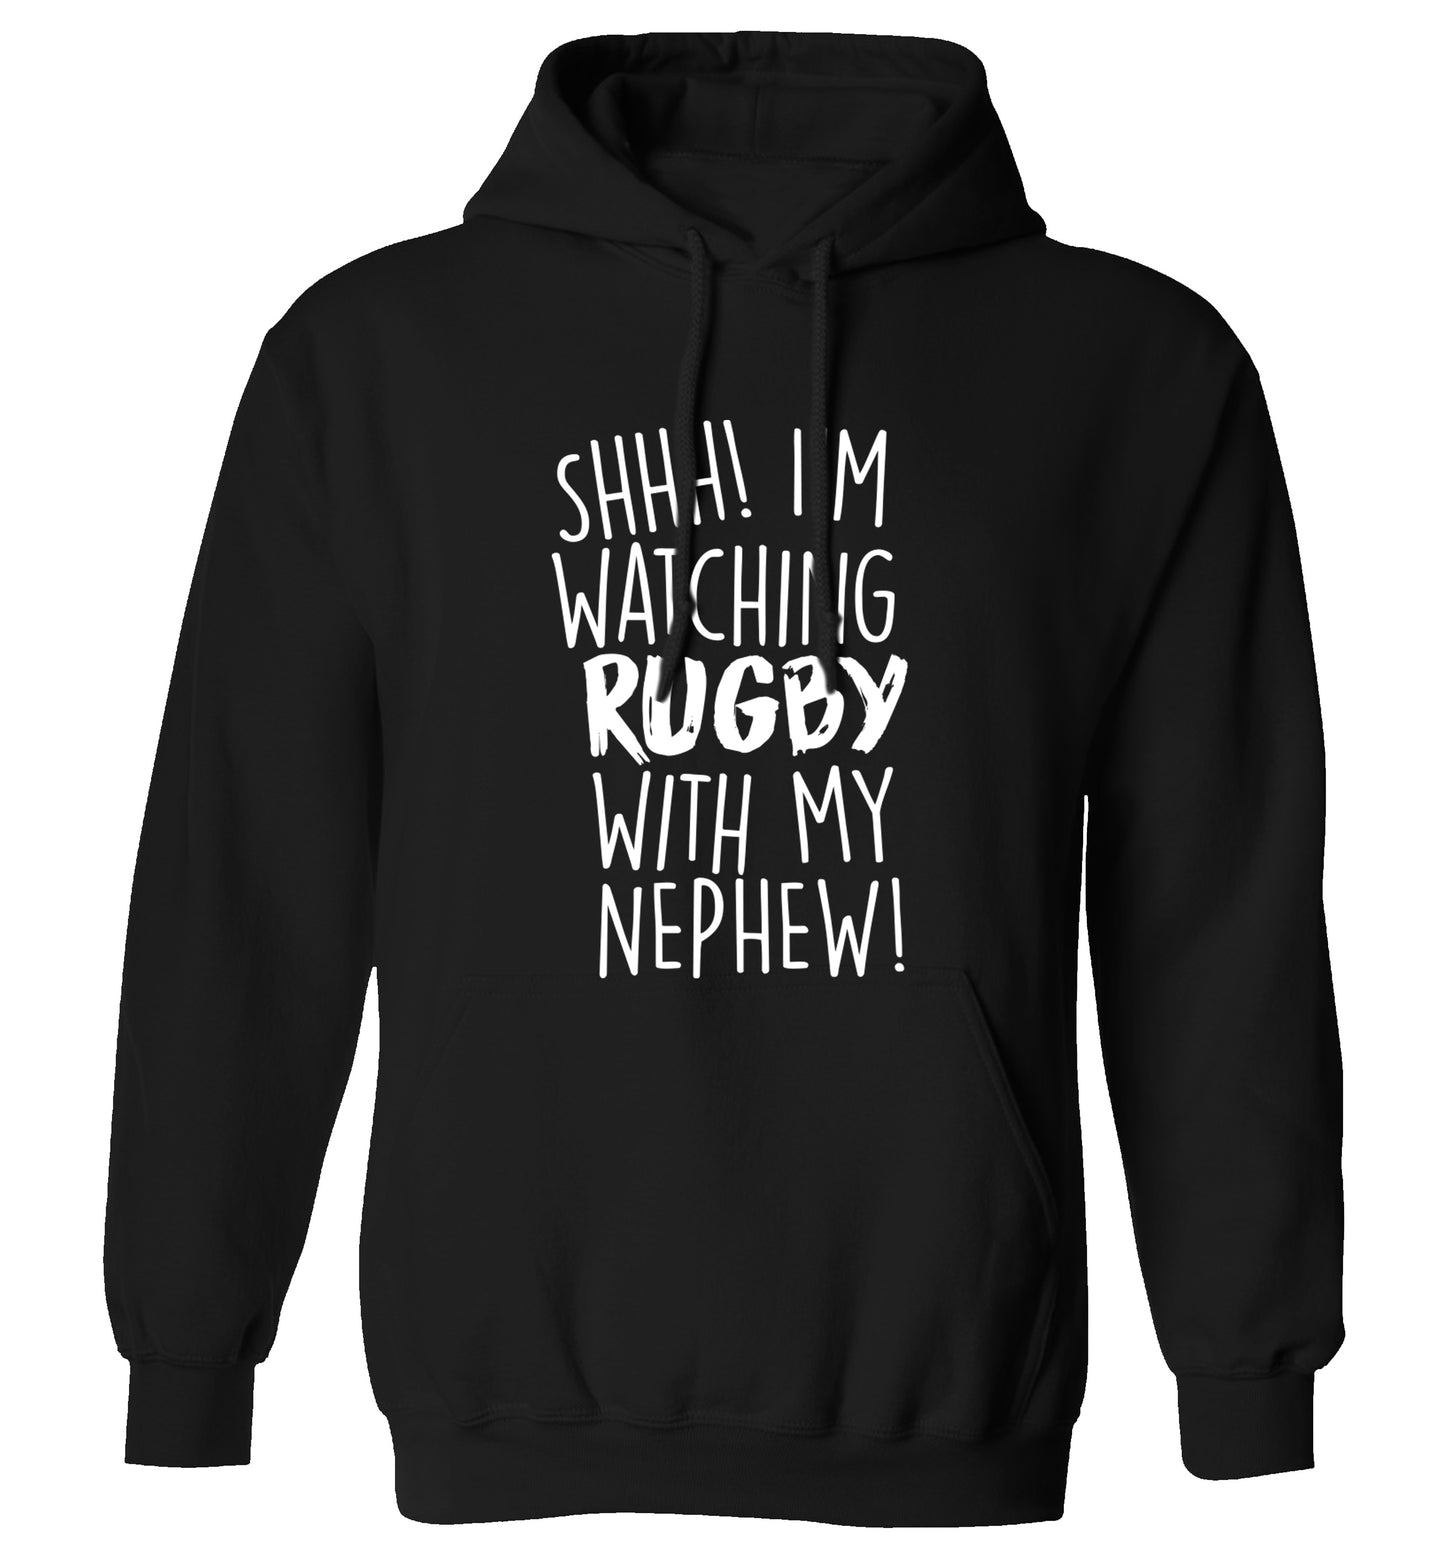 Shh.. I'm watching rugby with my nephew adults unisex black hoodie 2XL